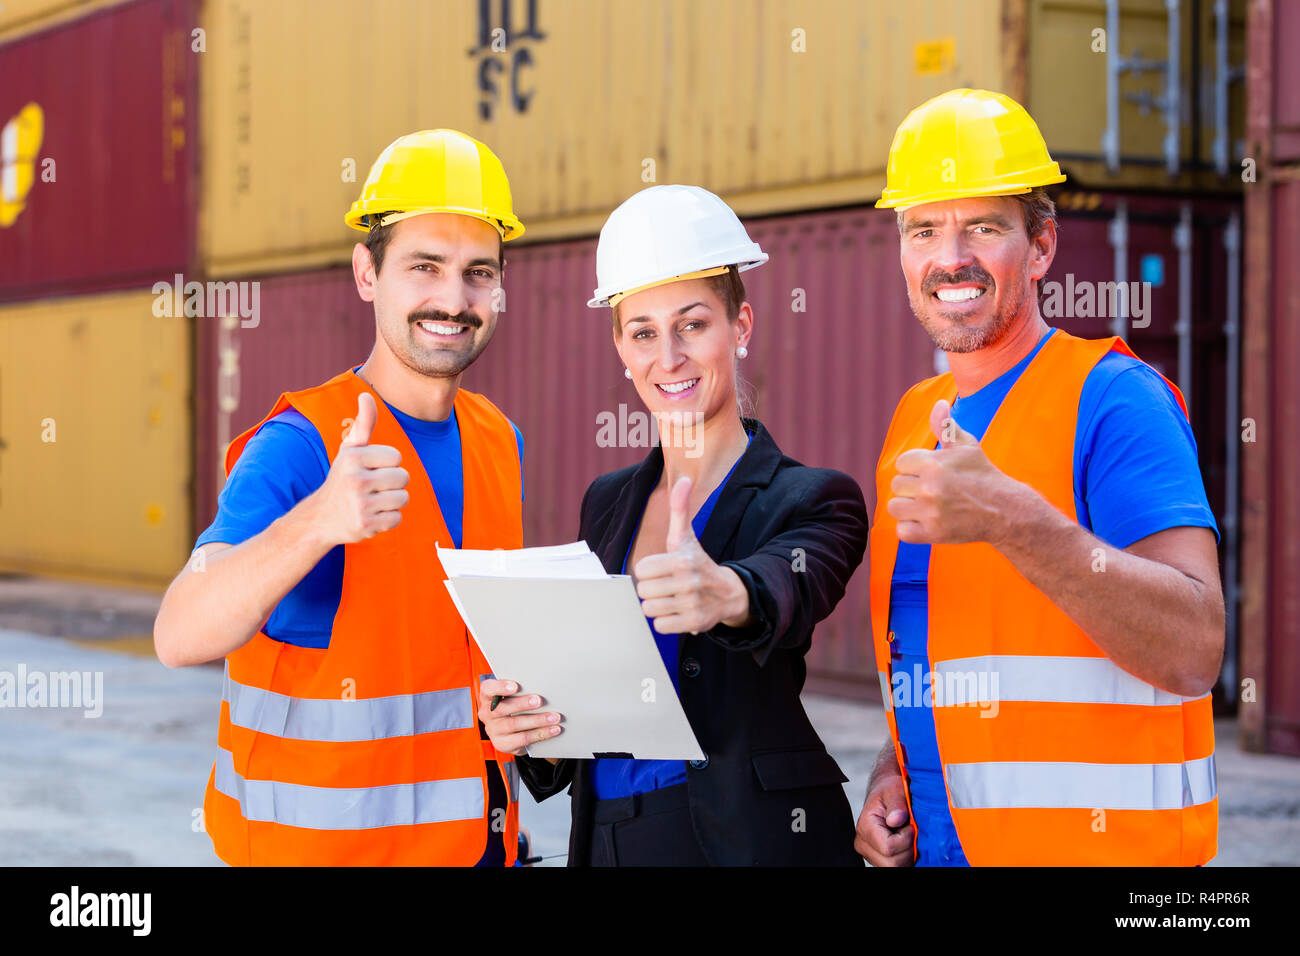 Shipping company workers in front of containers Stock Photo